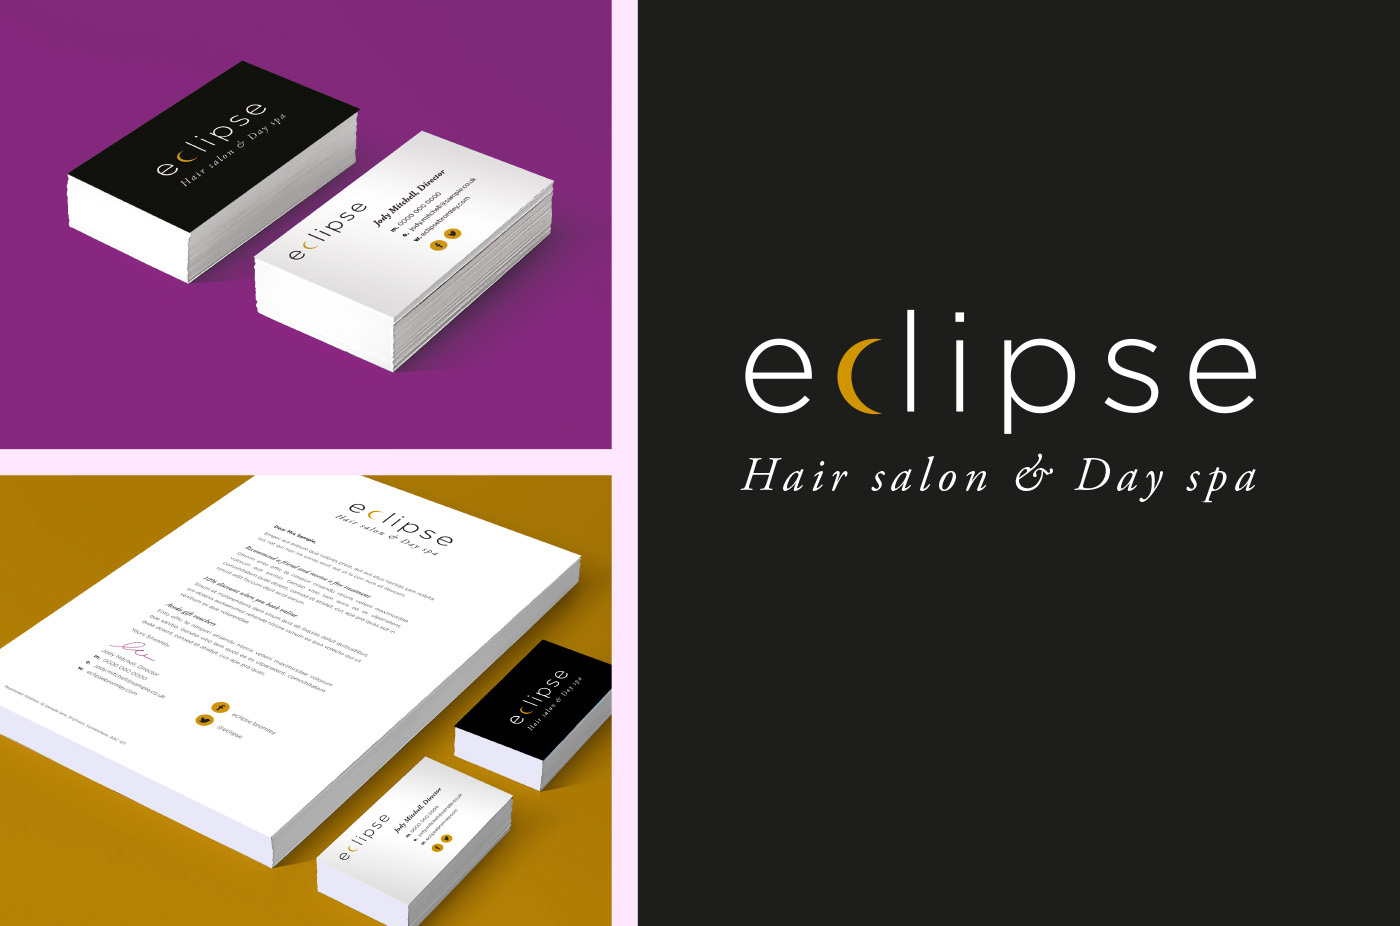 Eclipse Hair Salon and Day spa brand id and web design on Behance